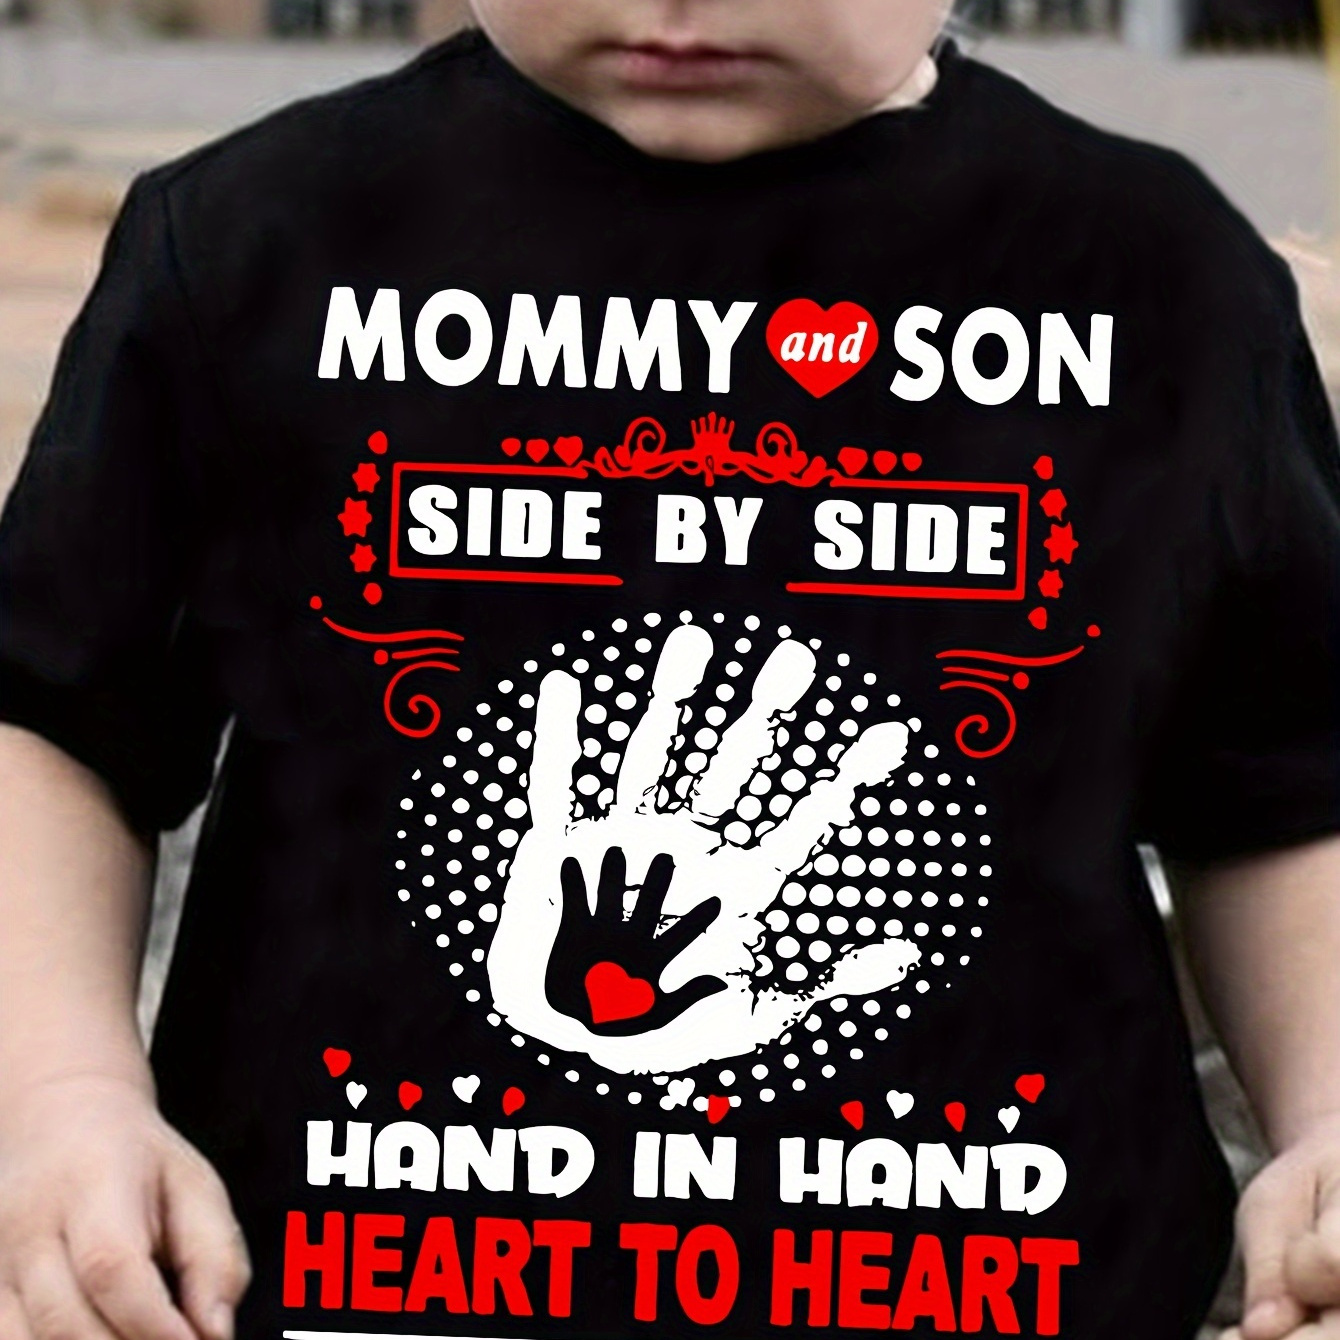 

Mommy And Son & Hand Prints & Heart Graphic Print Tee, Boys' Casual & Trendy Crew Neck Short Sleeve T-shirt For Spring & Summer, Boys' Clothes For Outdoor Activities & Mother's Day